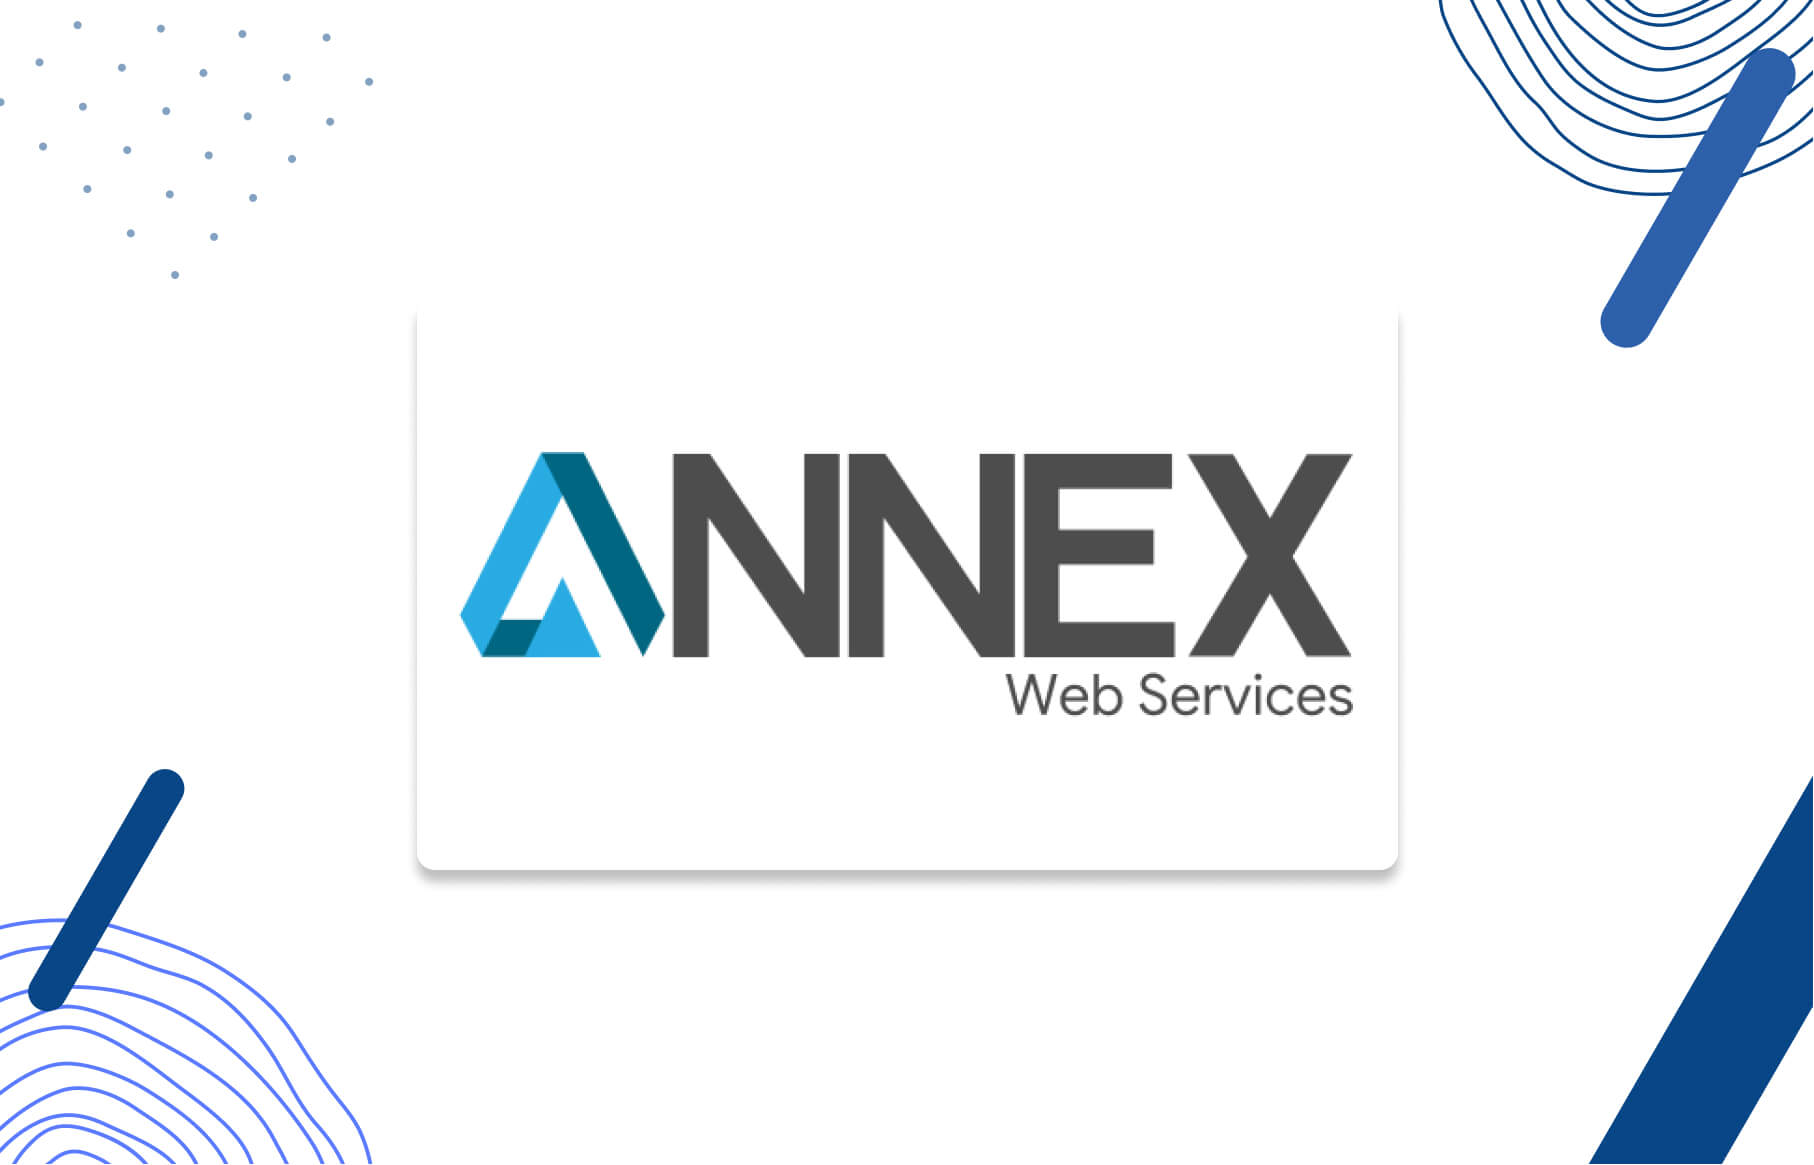 Annex Web Services Logo - RESULTS FOCUSED MARKETING AGENCY